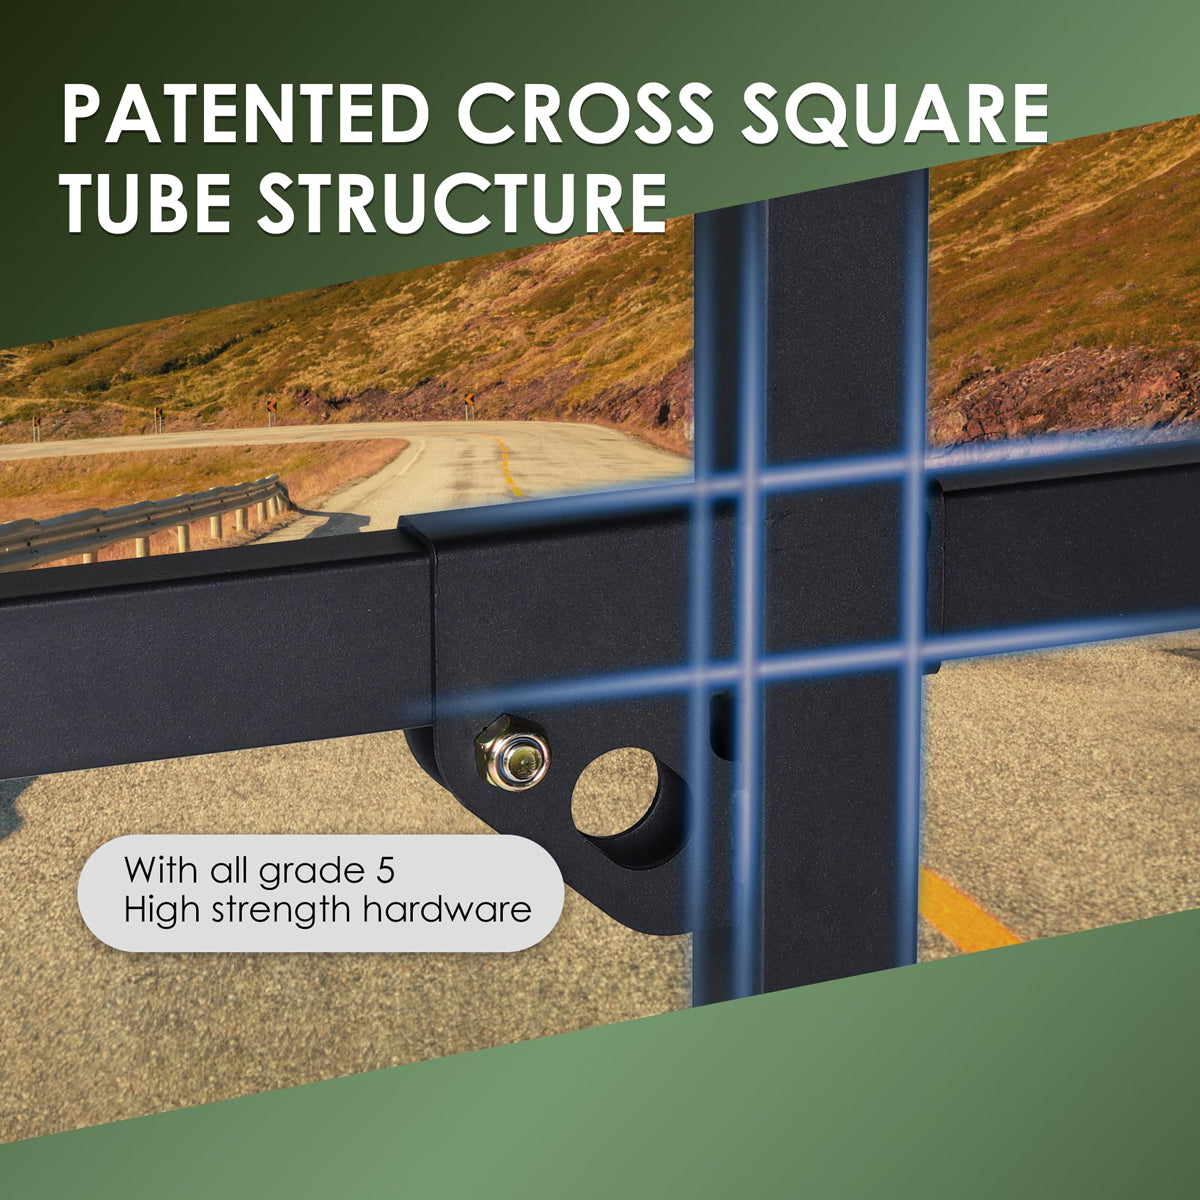 Patented Cross Square Tube Structure